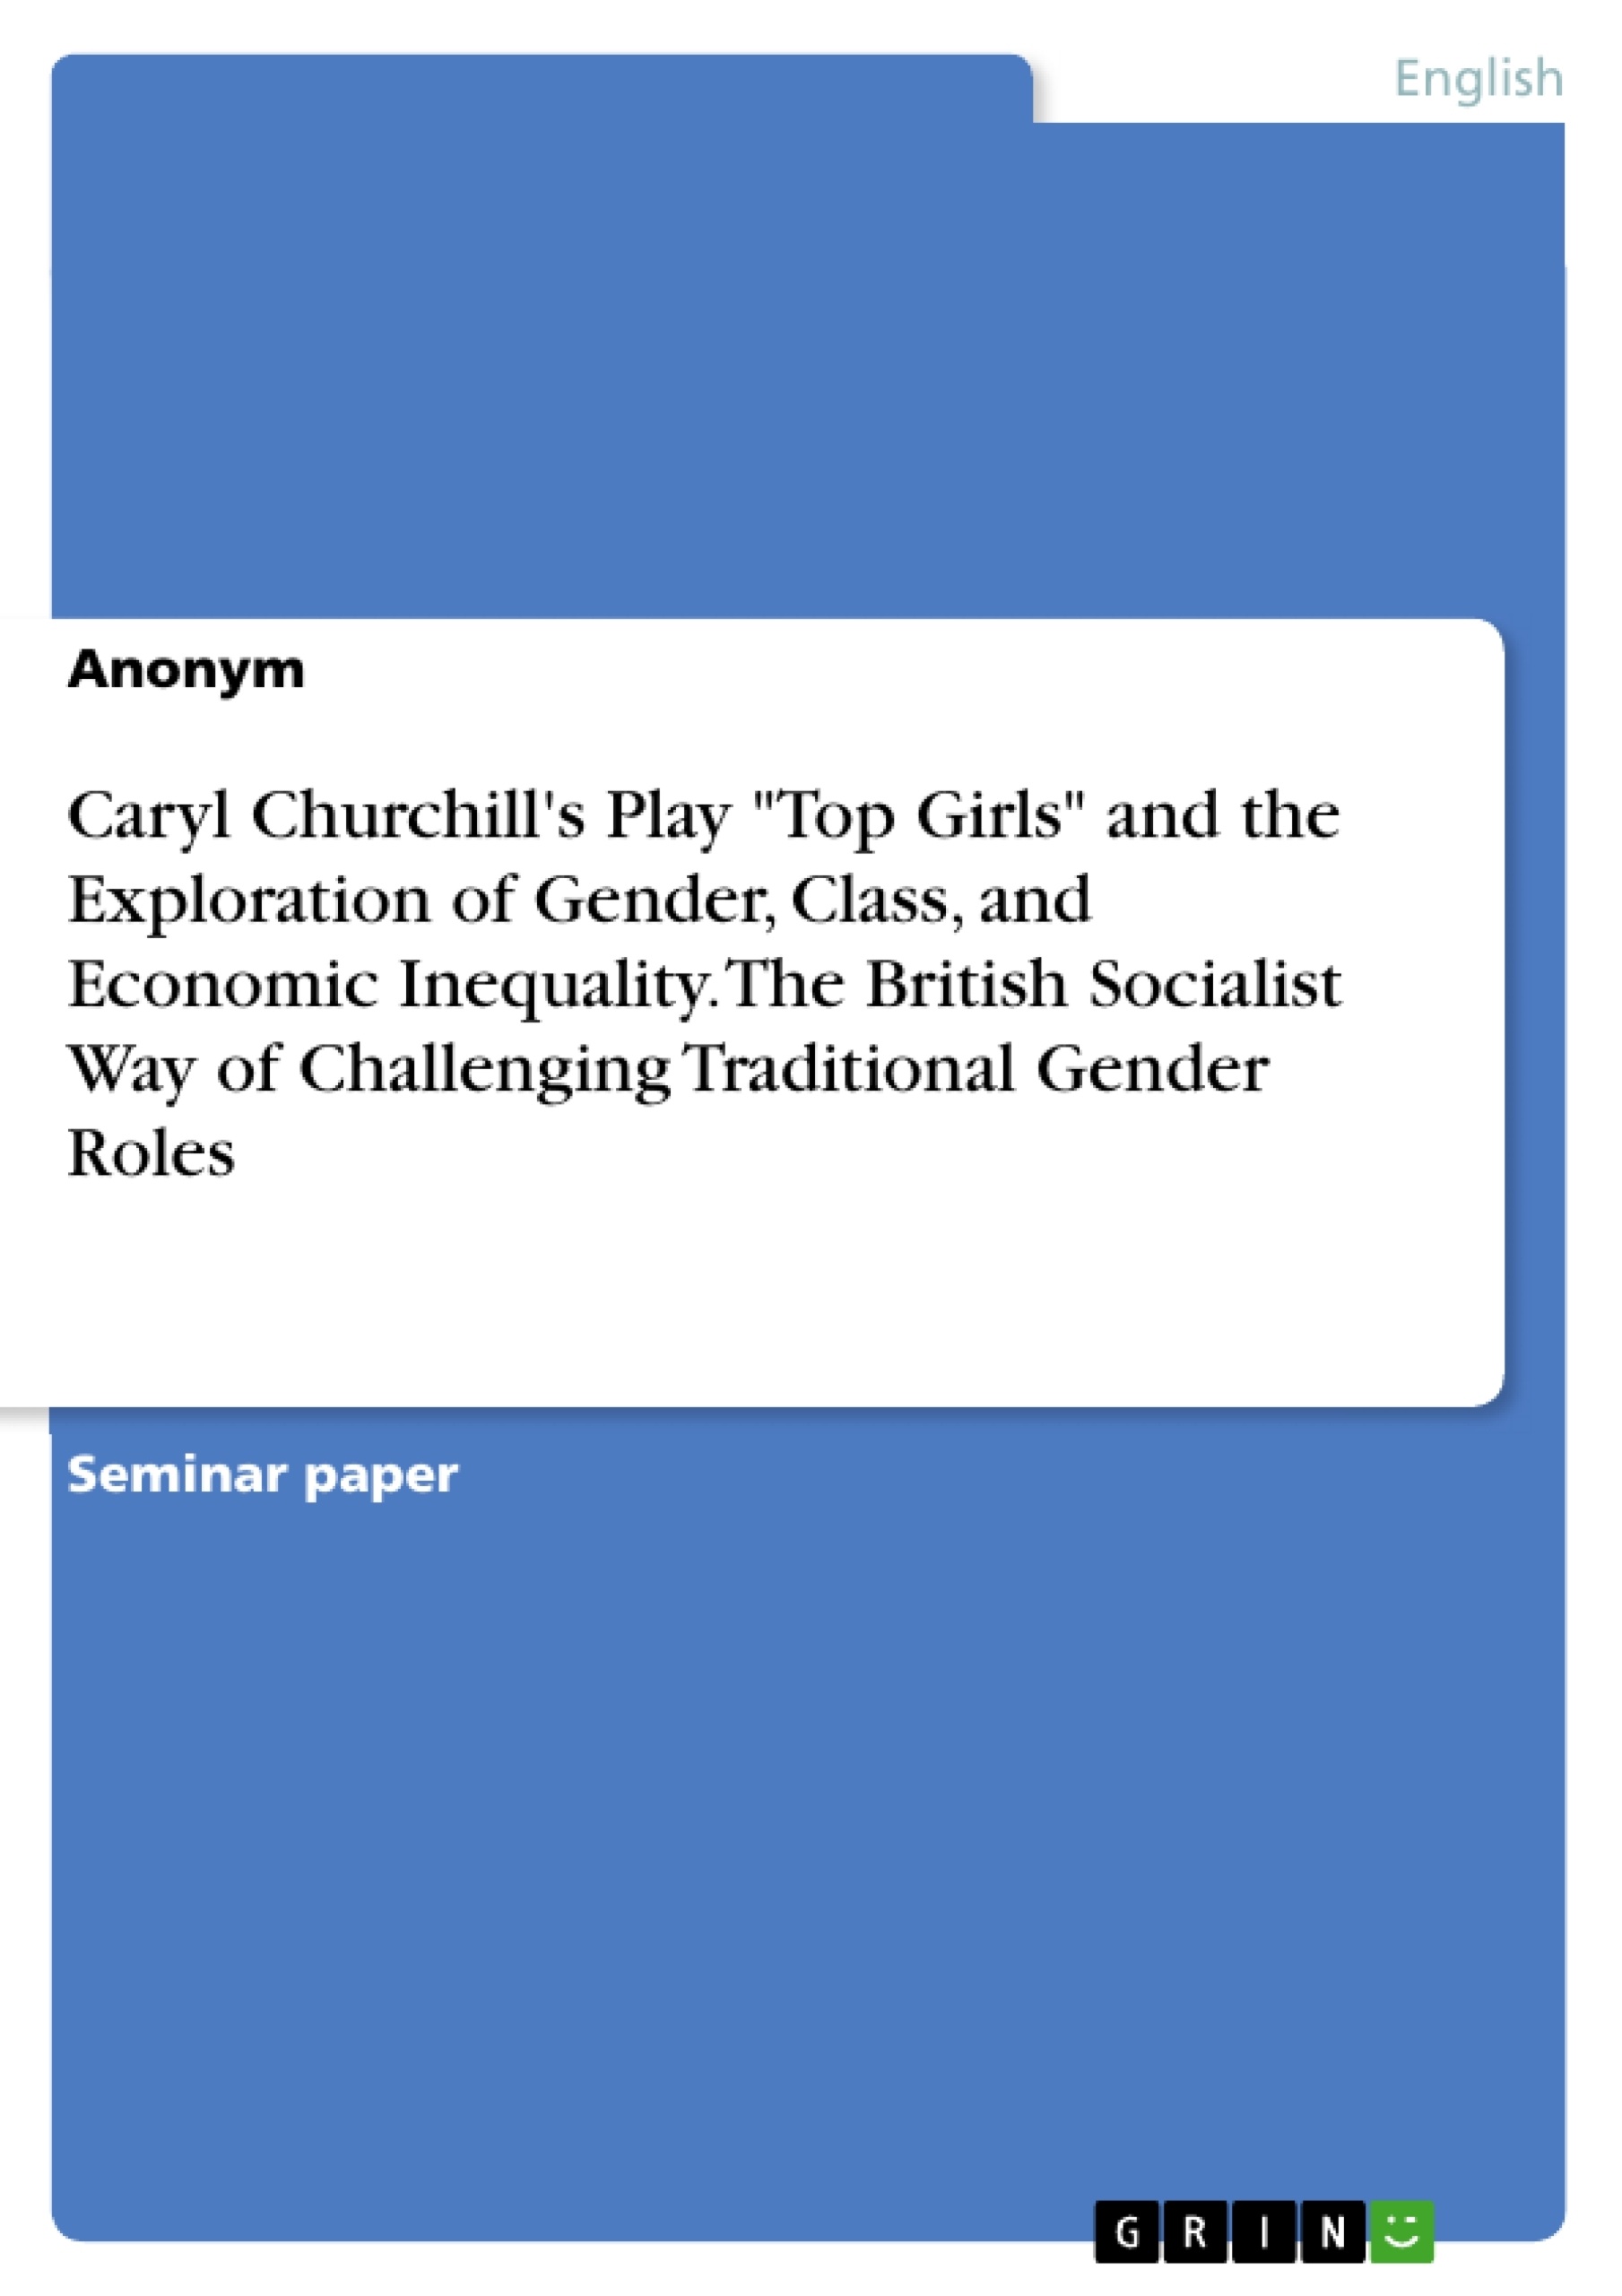 Title: Caryl Churchill's Play "Top Girls" and the Exploration of Gender, Class, and Economic Inequality. The British Socialist Way of Challenging Traditional Gender Roles